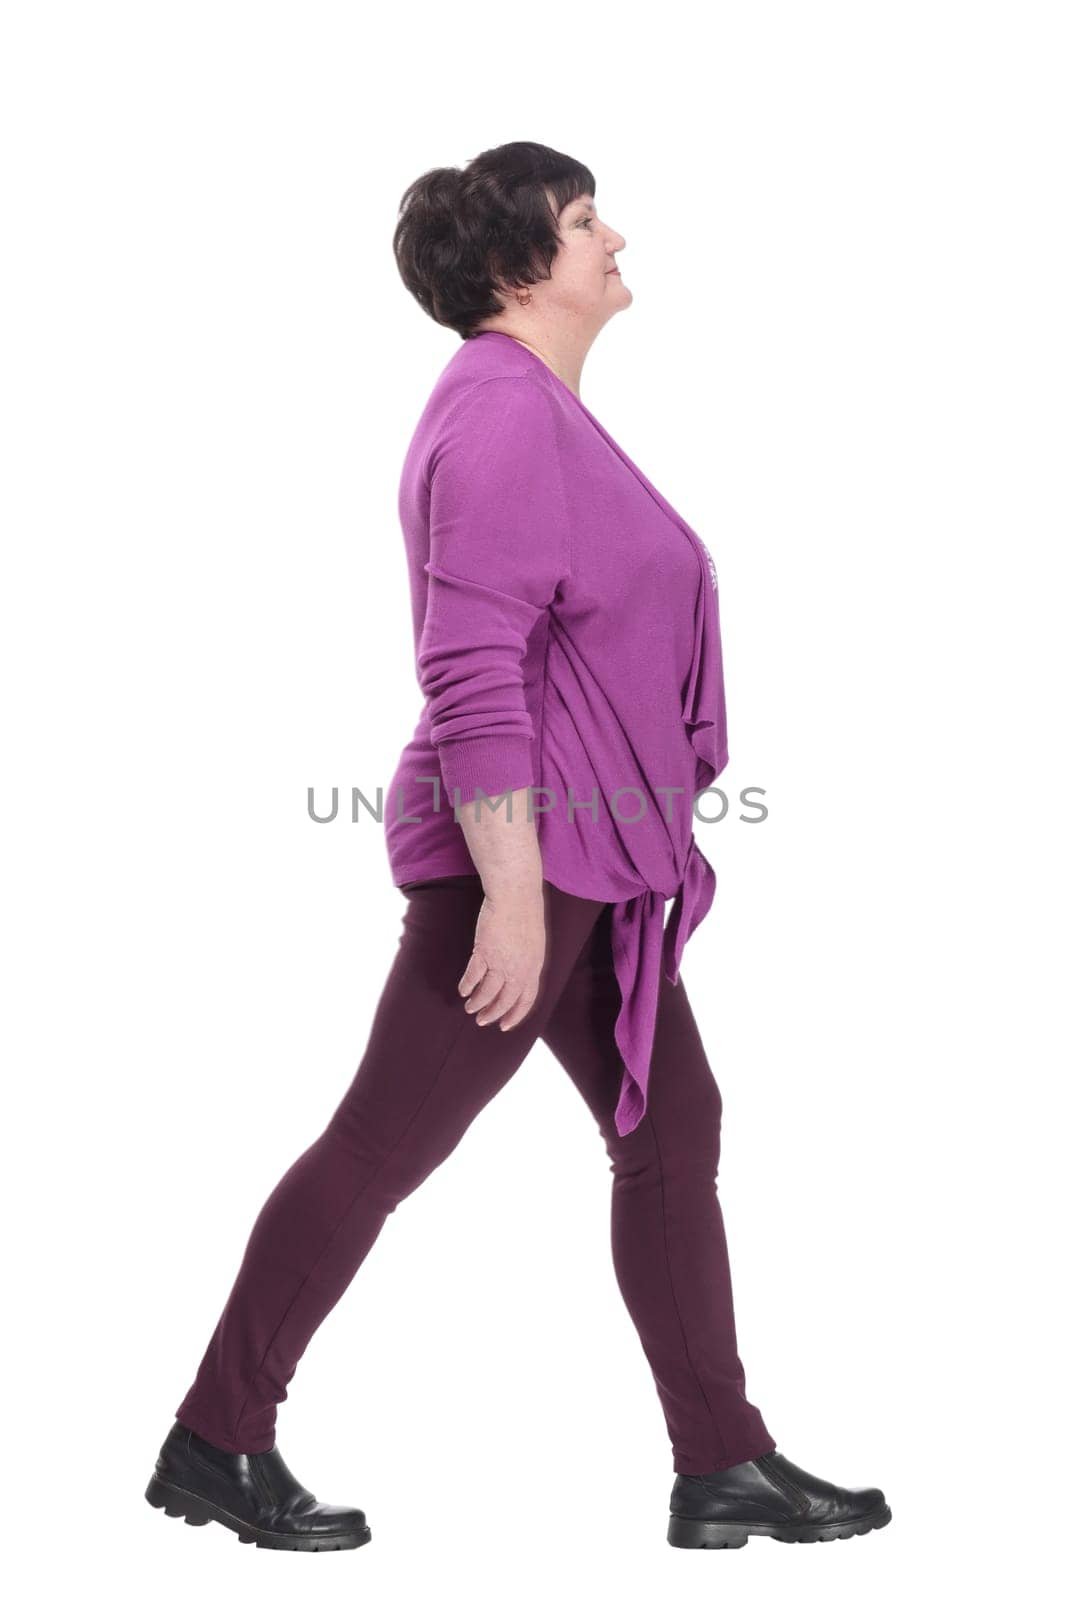 casual elderly woman in a purple blouse striding forward. by asdf